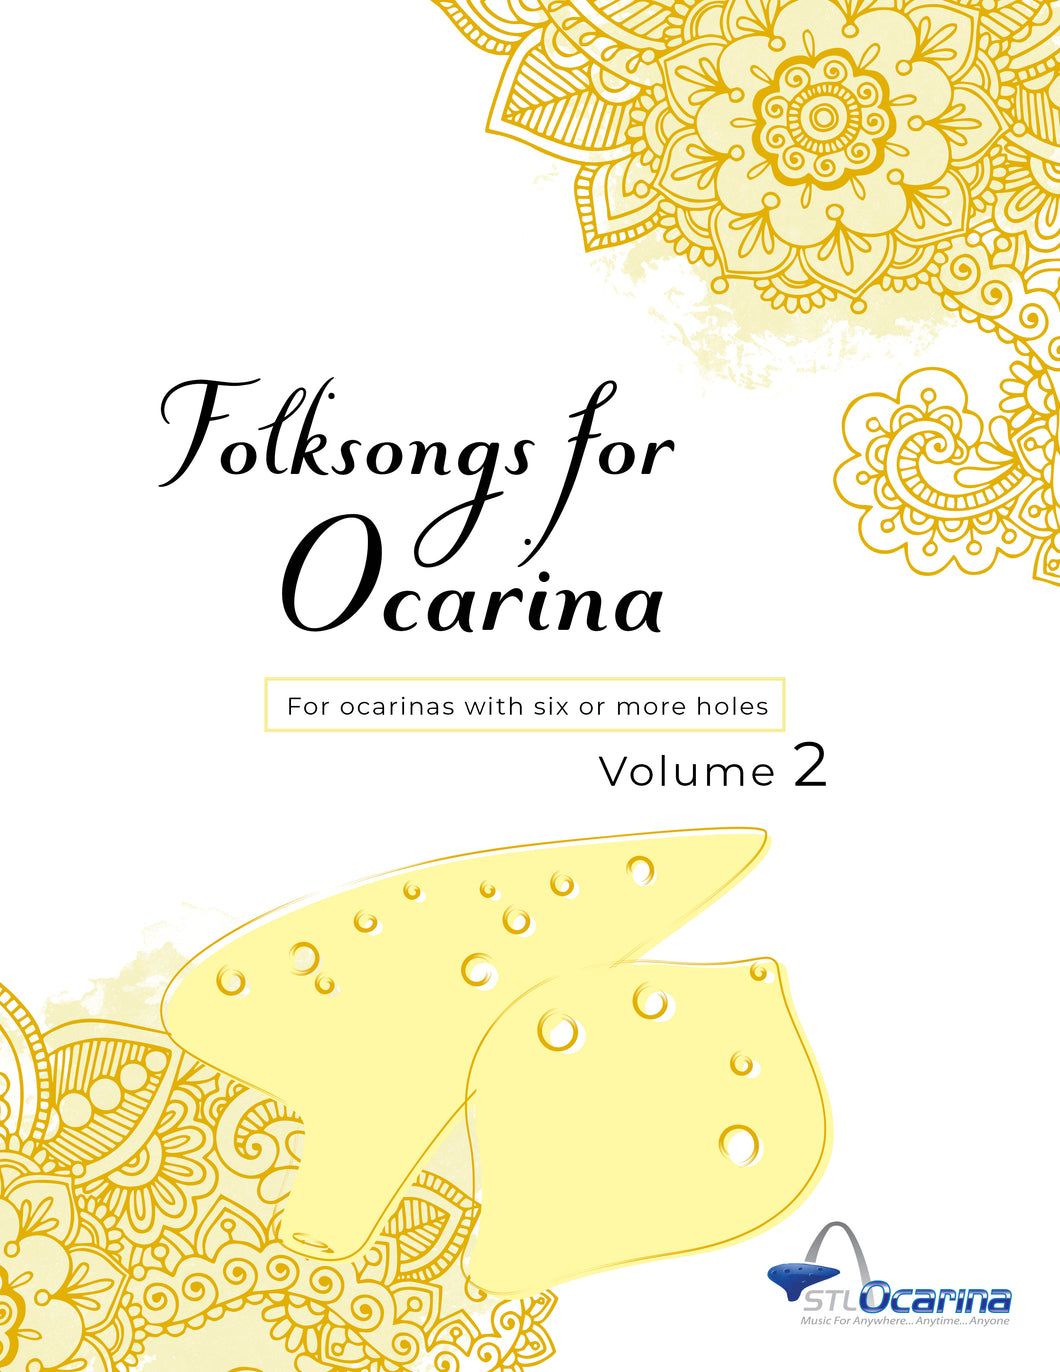 Folksongs for Ocarinas and Treble Instruments Volume 2